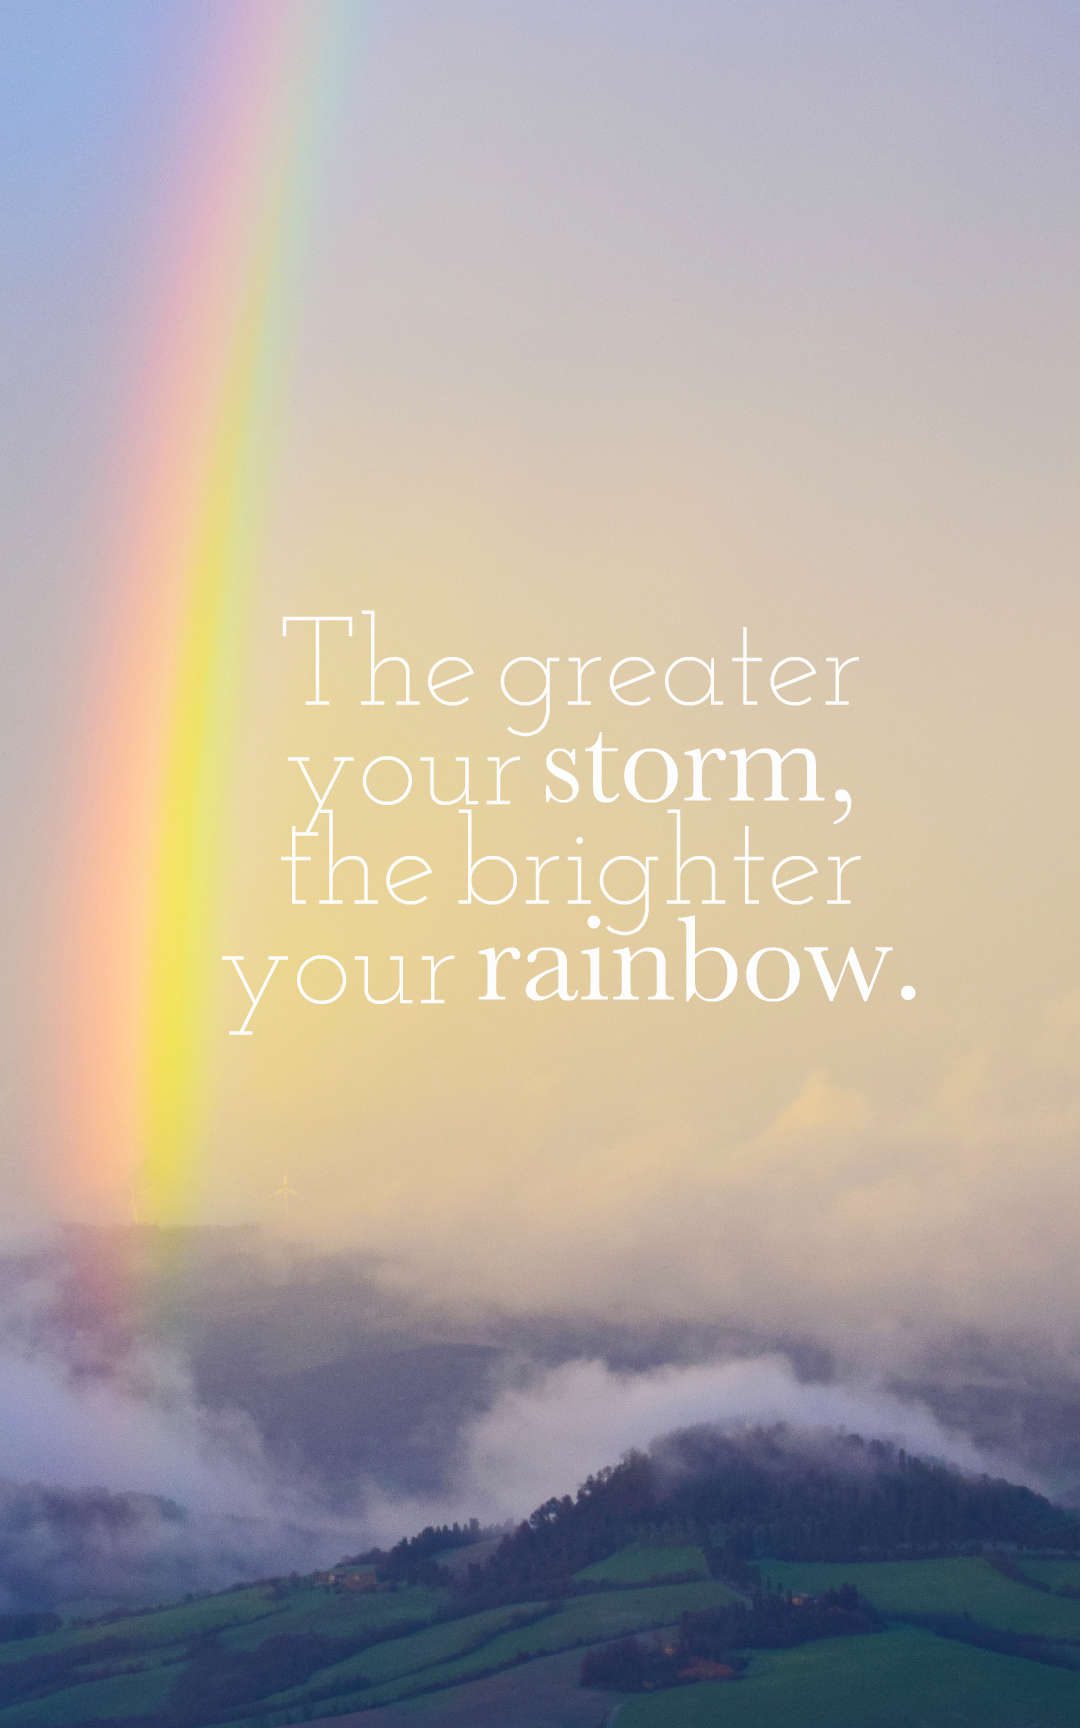 The greater your storm, the brighter your rainbow.